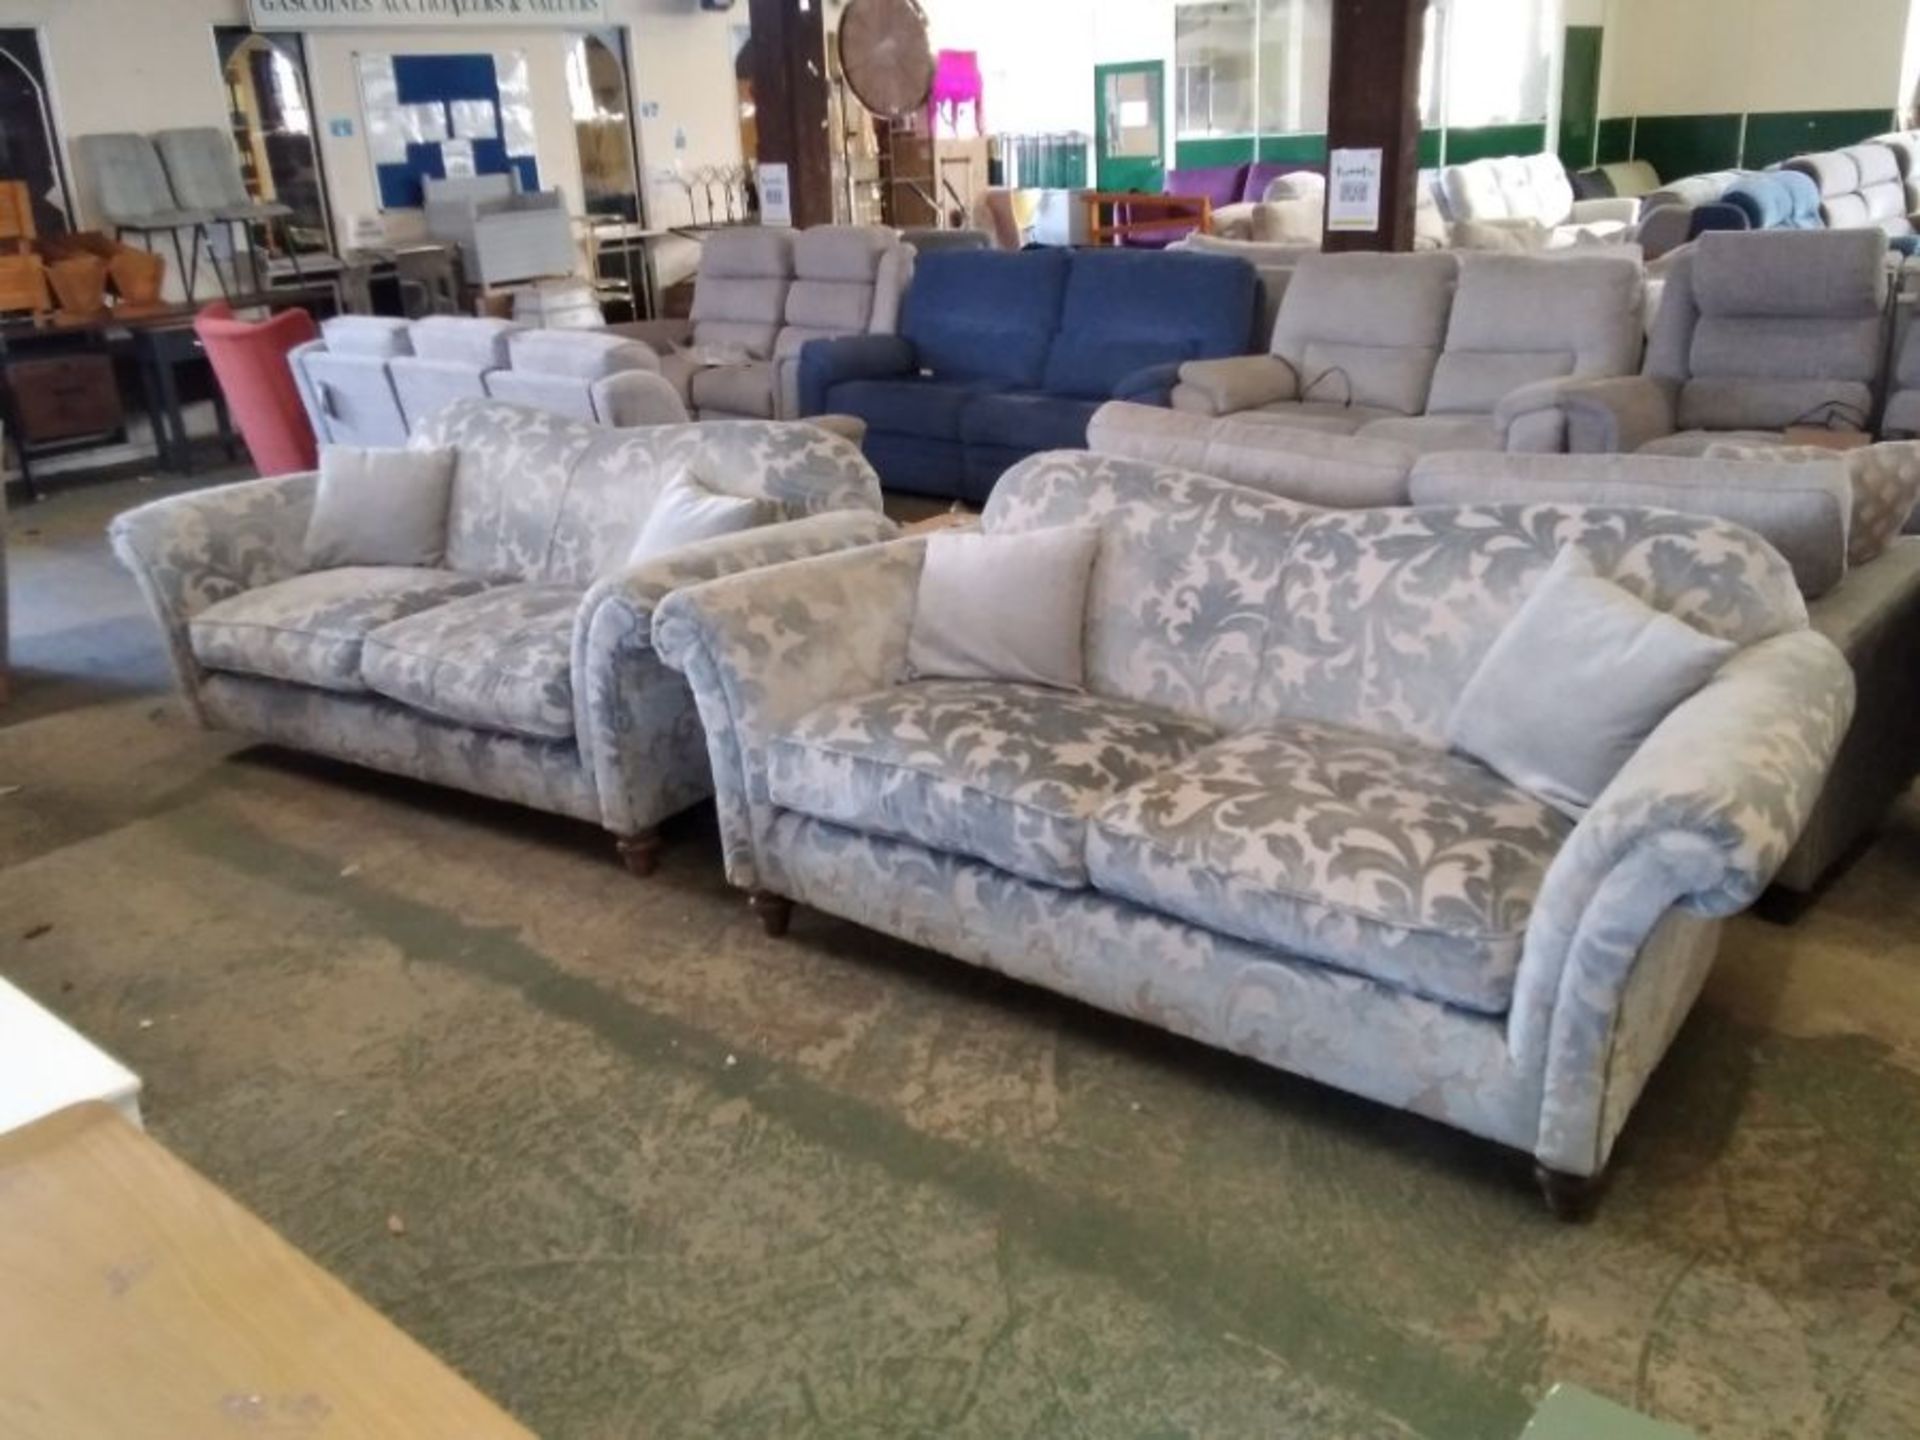 BLUE FLORAL PATTERNED 2 SEATER X 2 (USED, MISSING FOOT) (TROO288